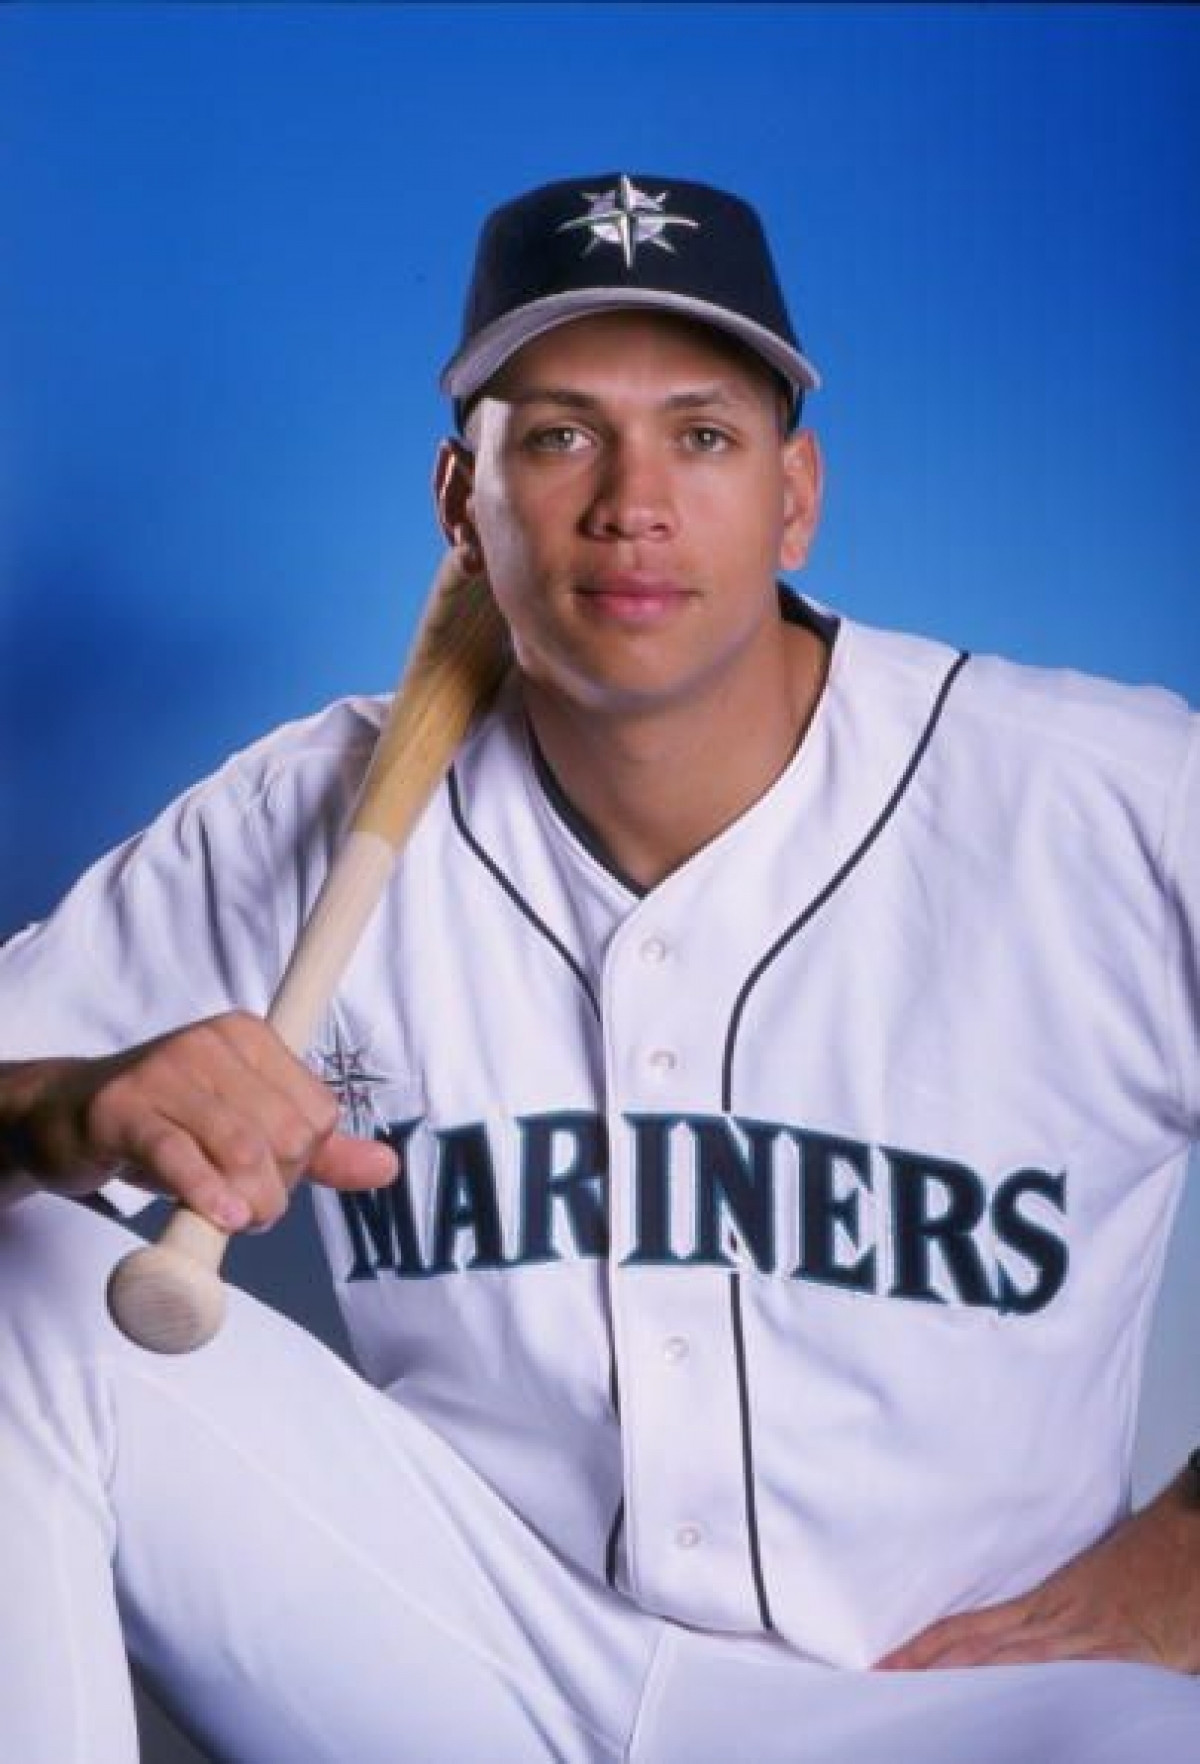 Not in Hall of Fame - 6. Alex Rodriguez